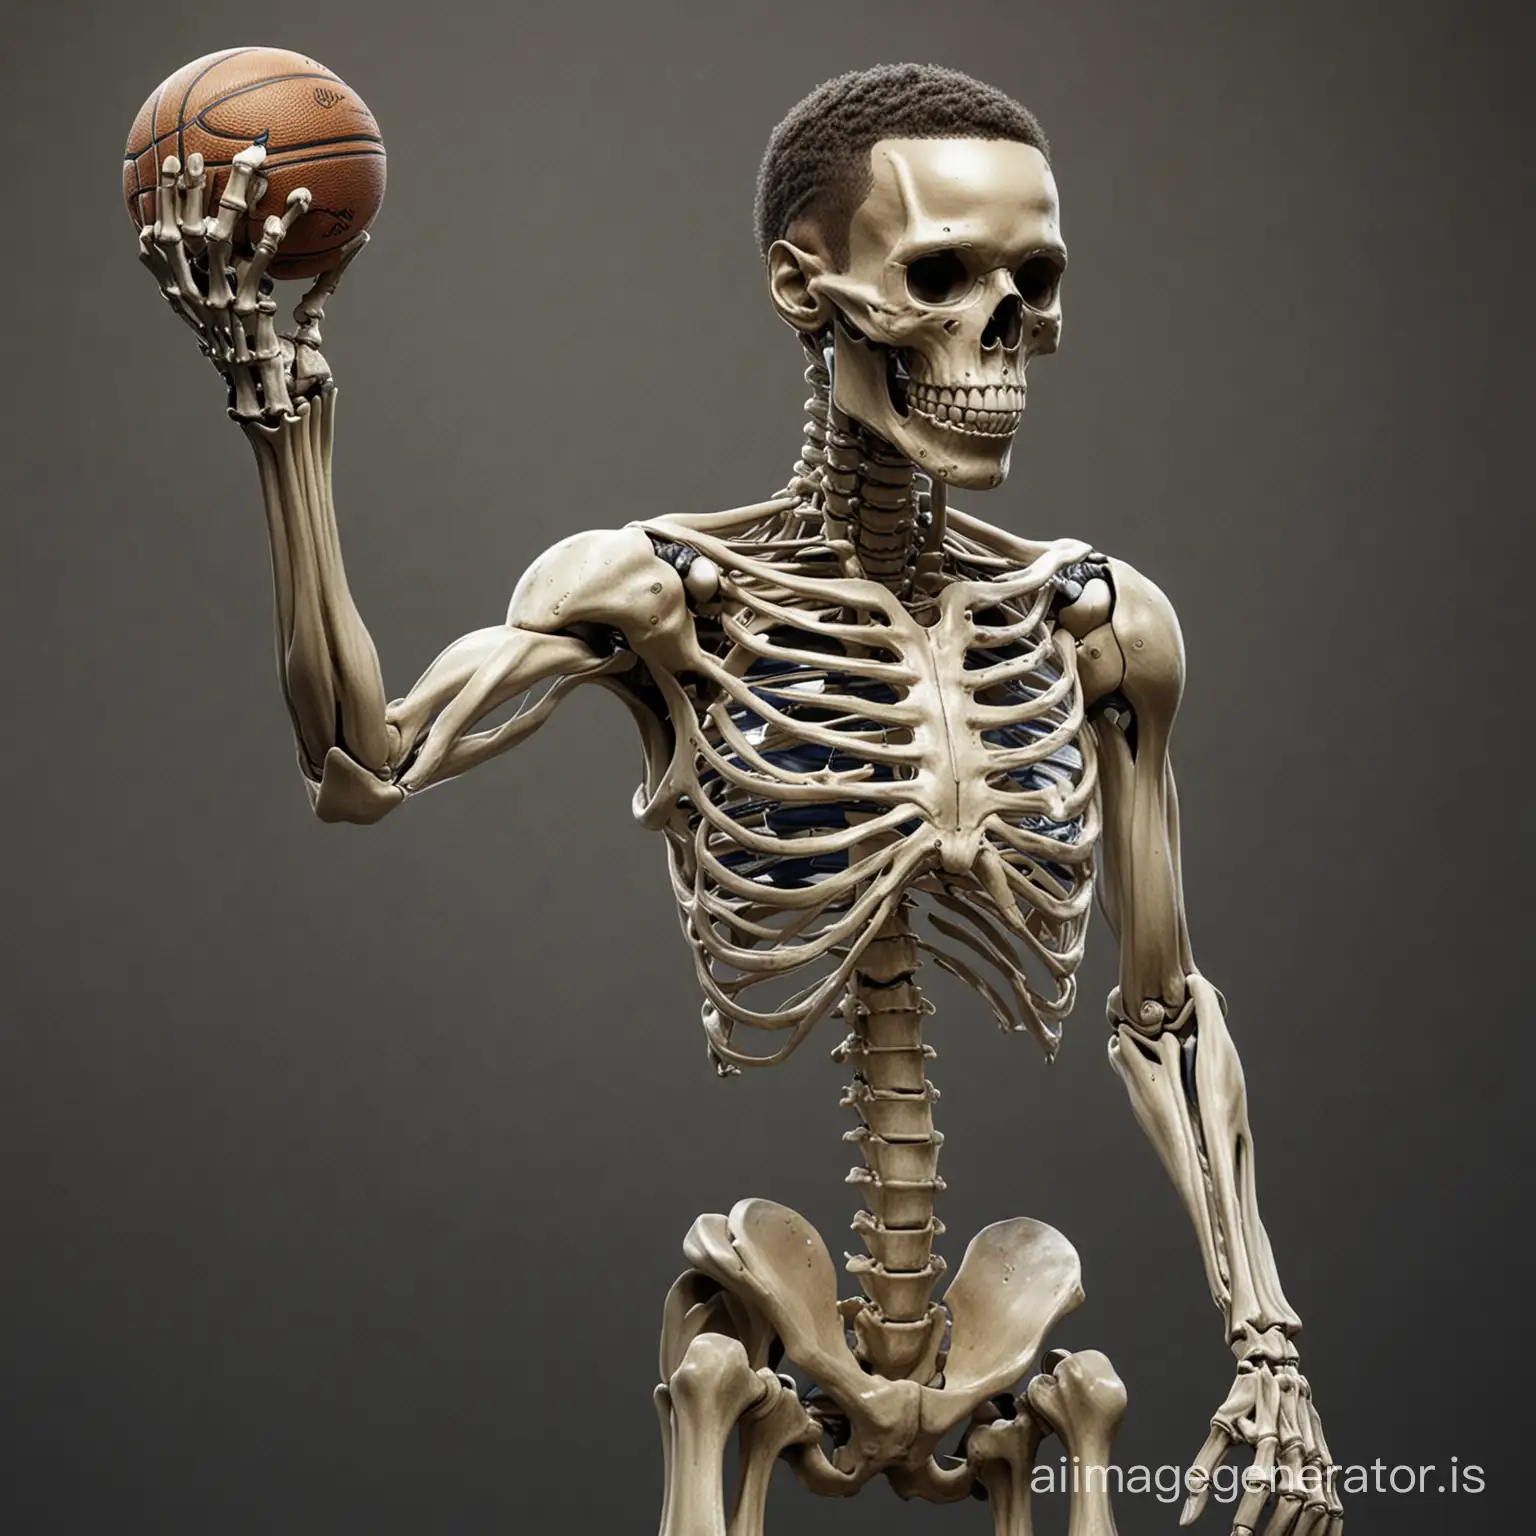 Stephen-Curry-Dribbling-with-Skeleton-Defense-in-Basketball-Court